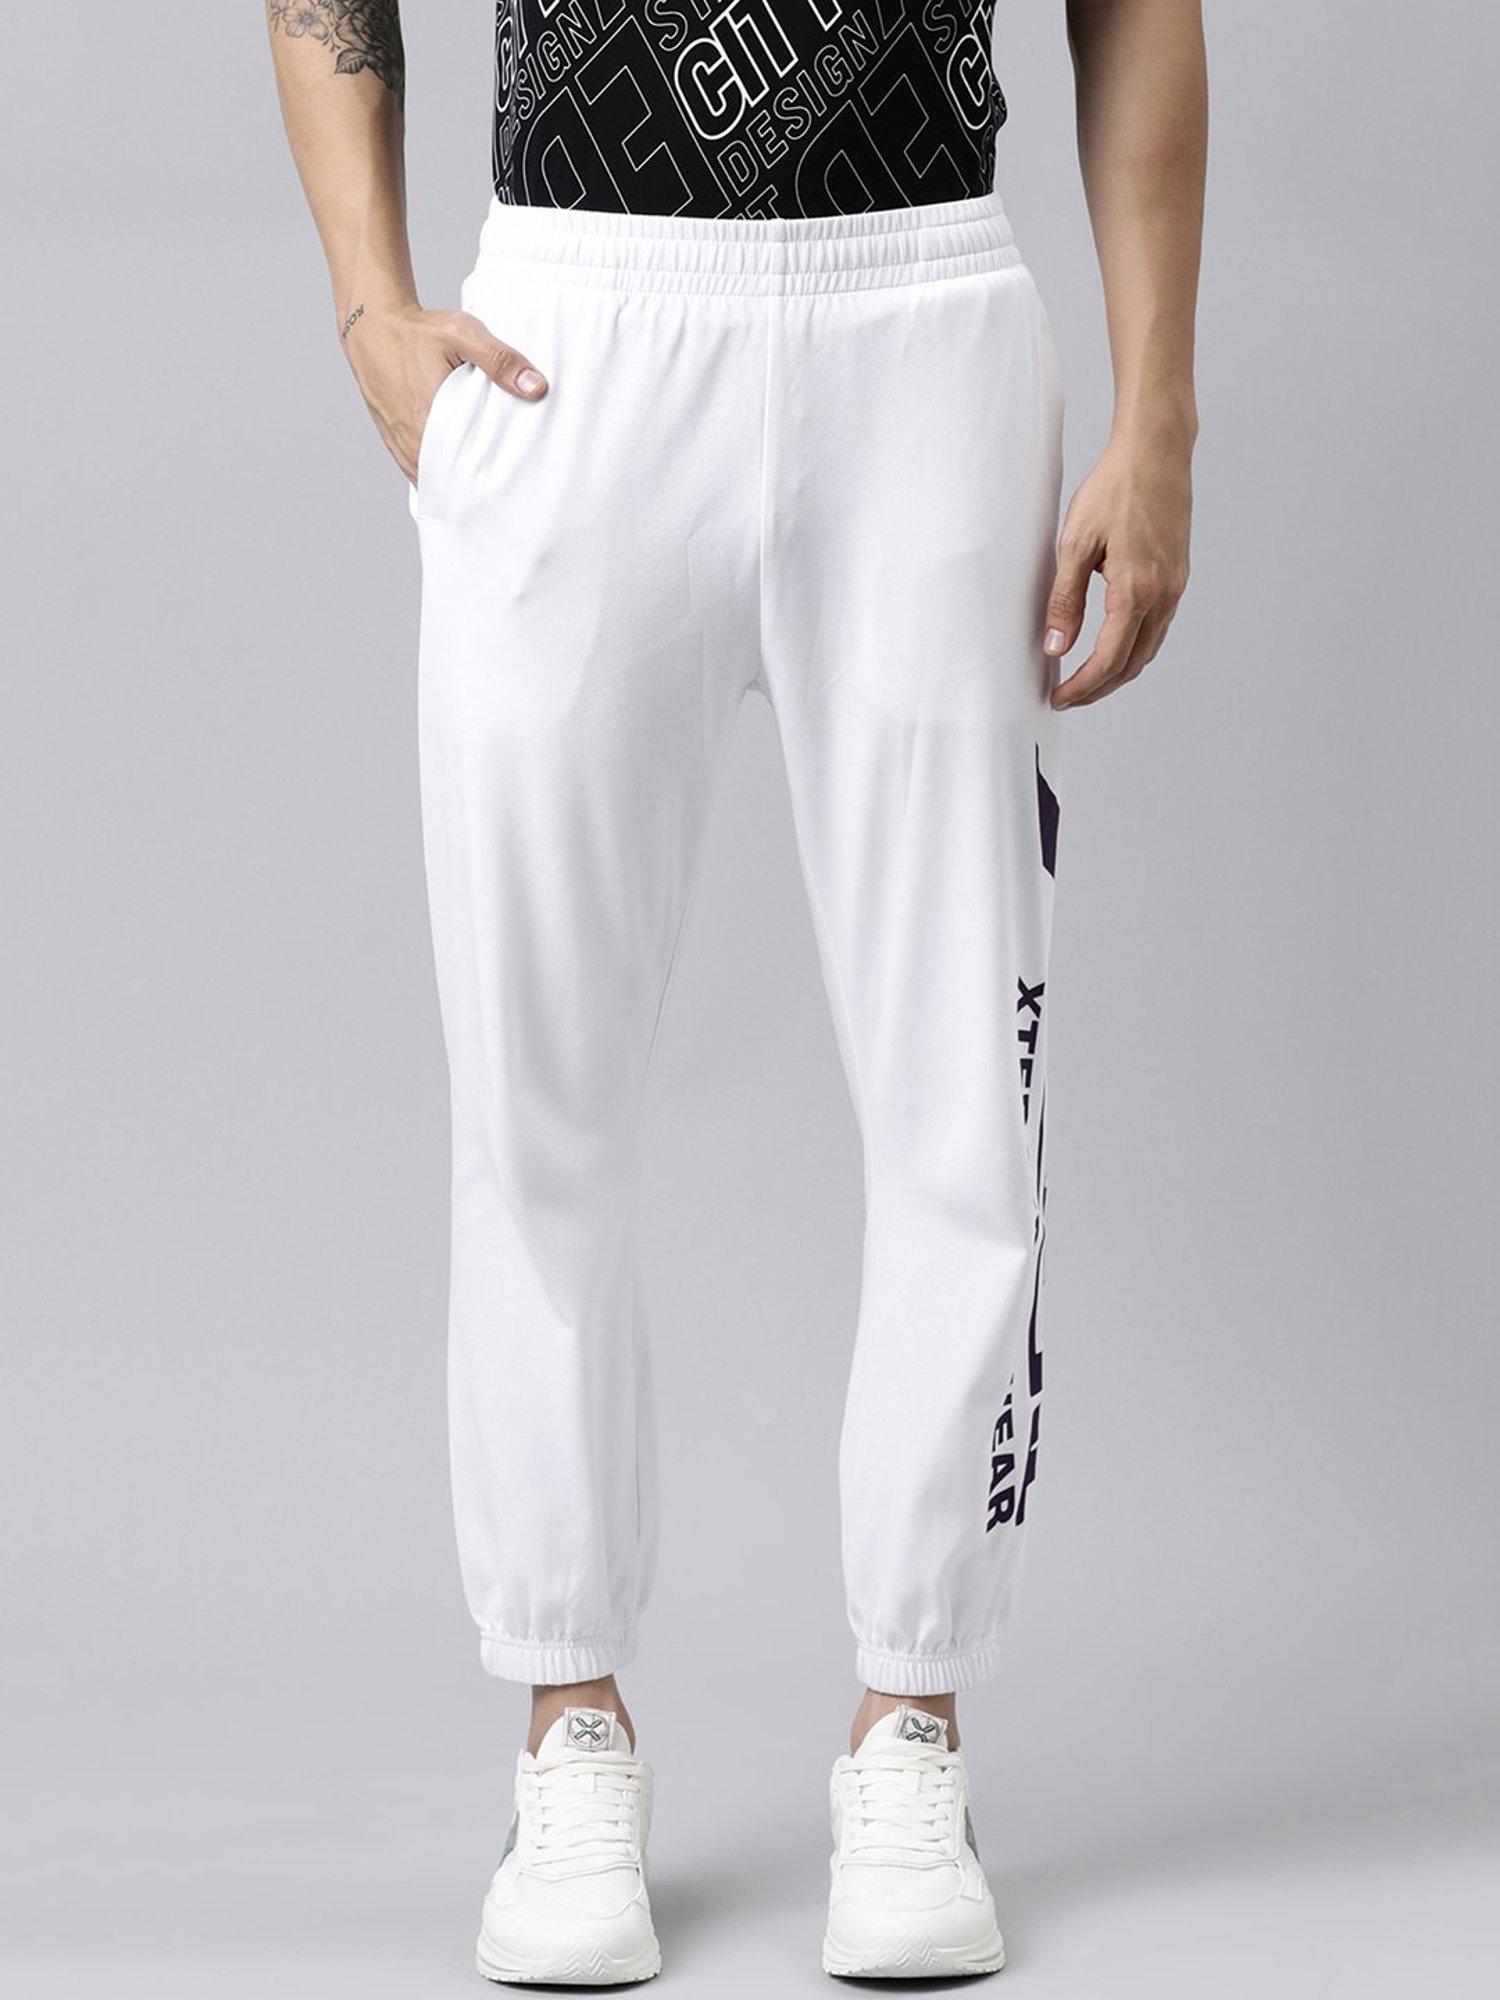 Buy adidas Originals Women Cream Side Stripes Track Pants for Women Online   The Collective